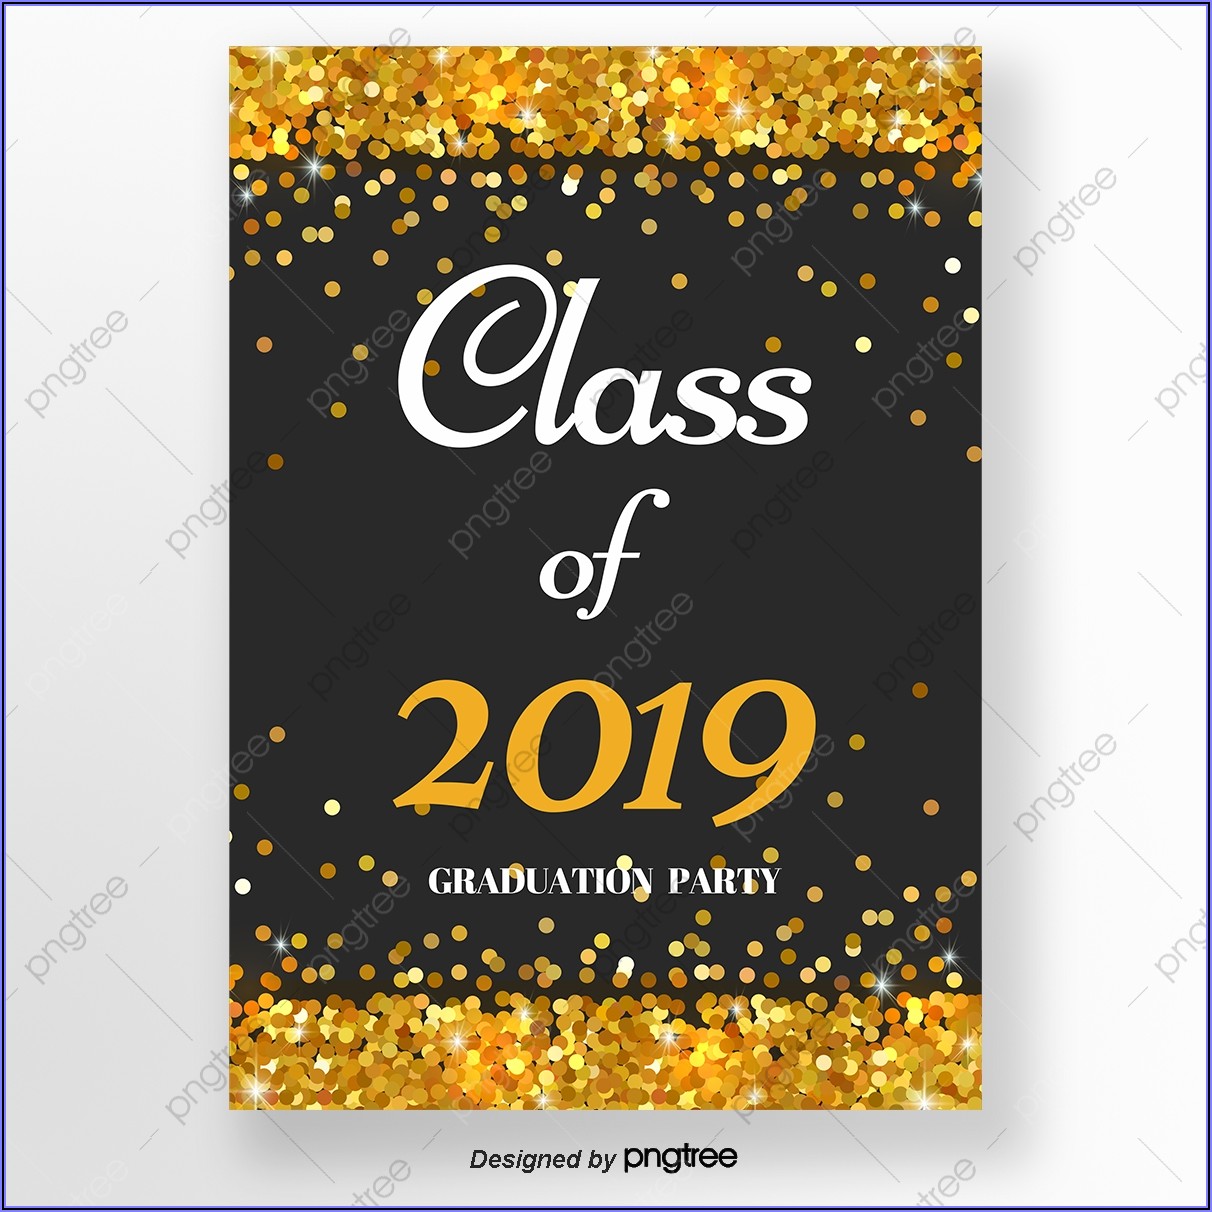 Template For Graduation Party Invitation